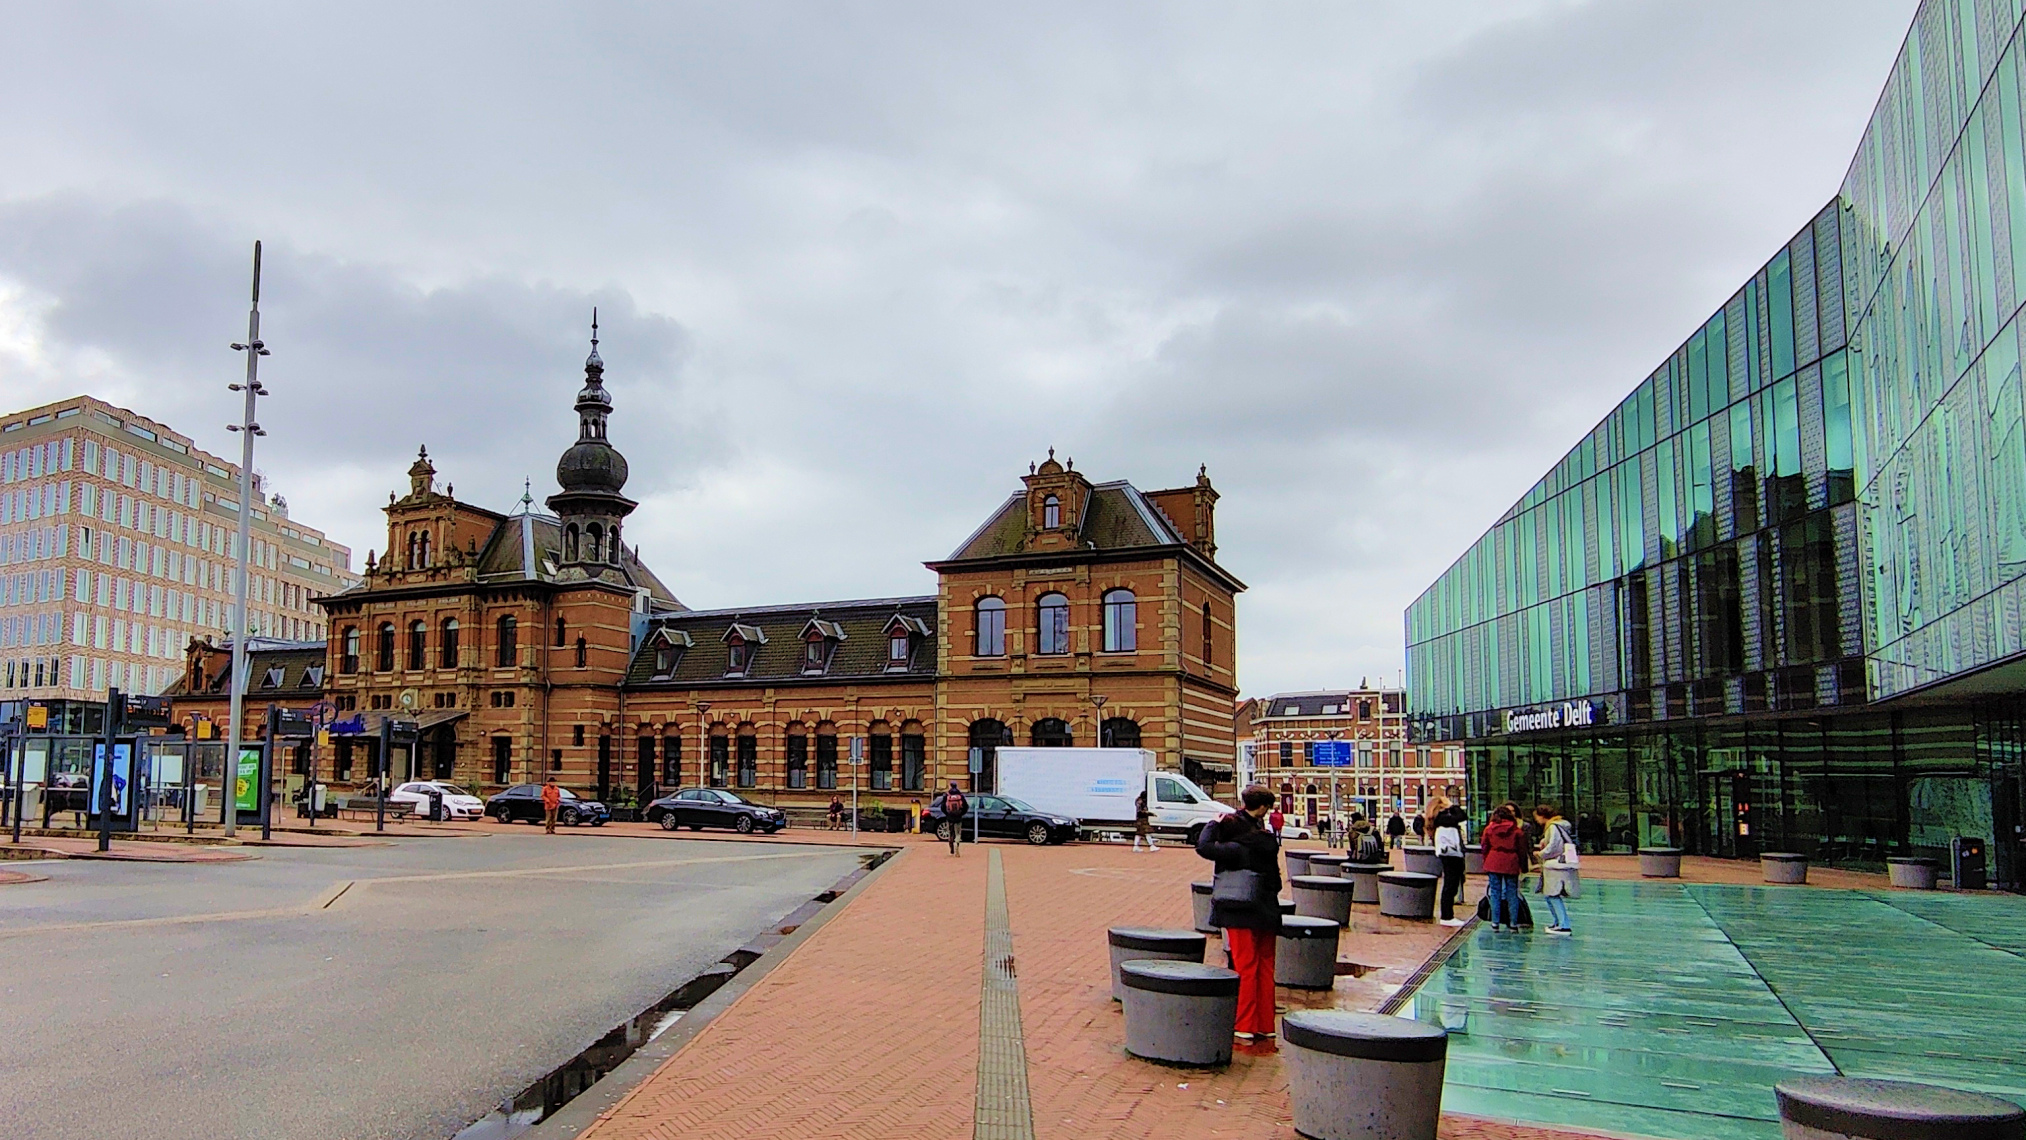 The old and new train stations of Delft captured in one picture